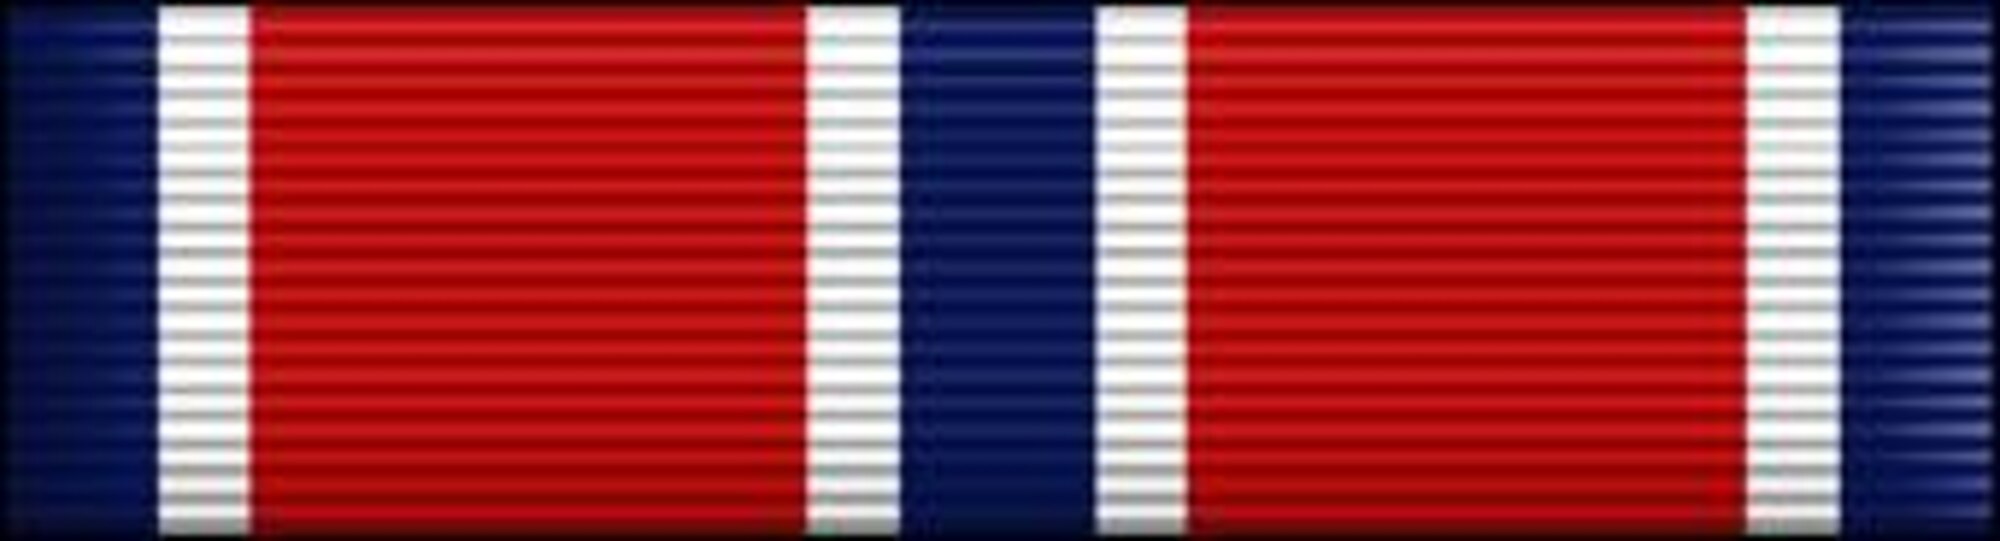 Air Force Organizational Excellence Award, award recognizes the achievements and accomplishments of U.S. Air Force organizations or activities. It is awarded to Air Force internal organizations that are entities within larger organizations. Air Force Awards and Decorations (enhance color), U.S. Air Force graphic, AFNEWS/PAND.  The JPG image is a stylized version whereas the EPS version is a two-dimensional line art illustration.